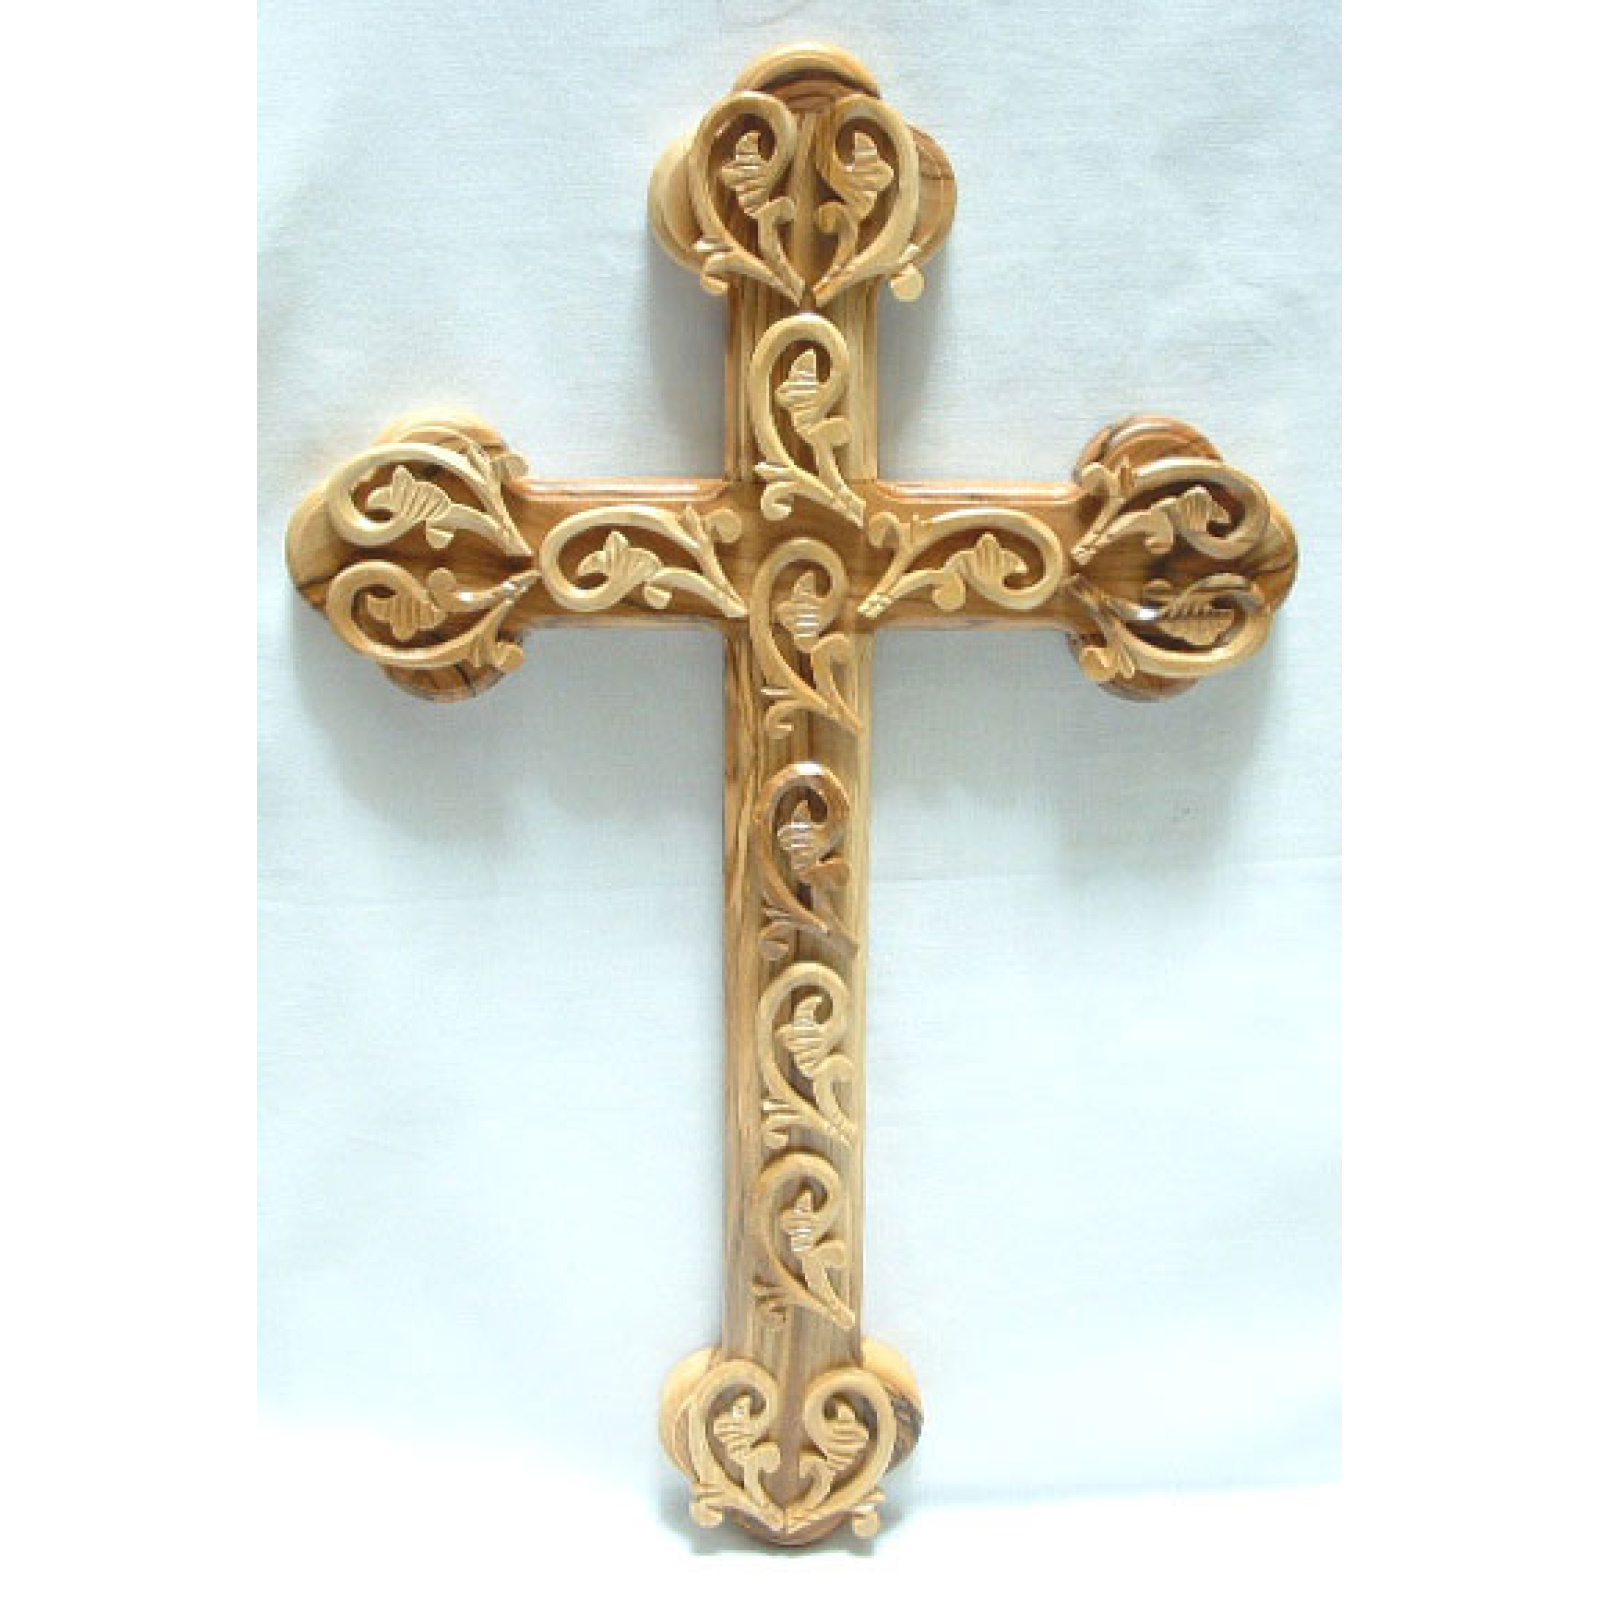 Budded cross with decorations